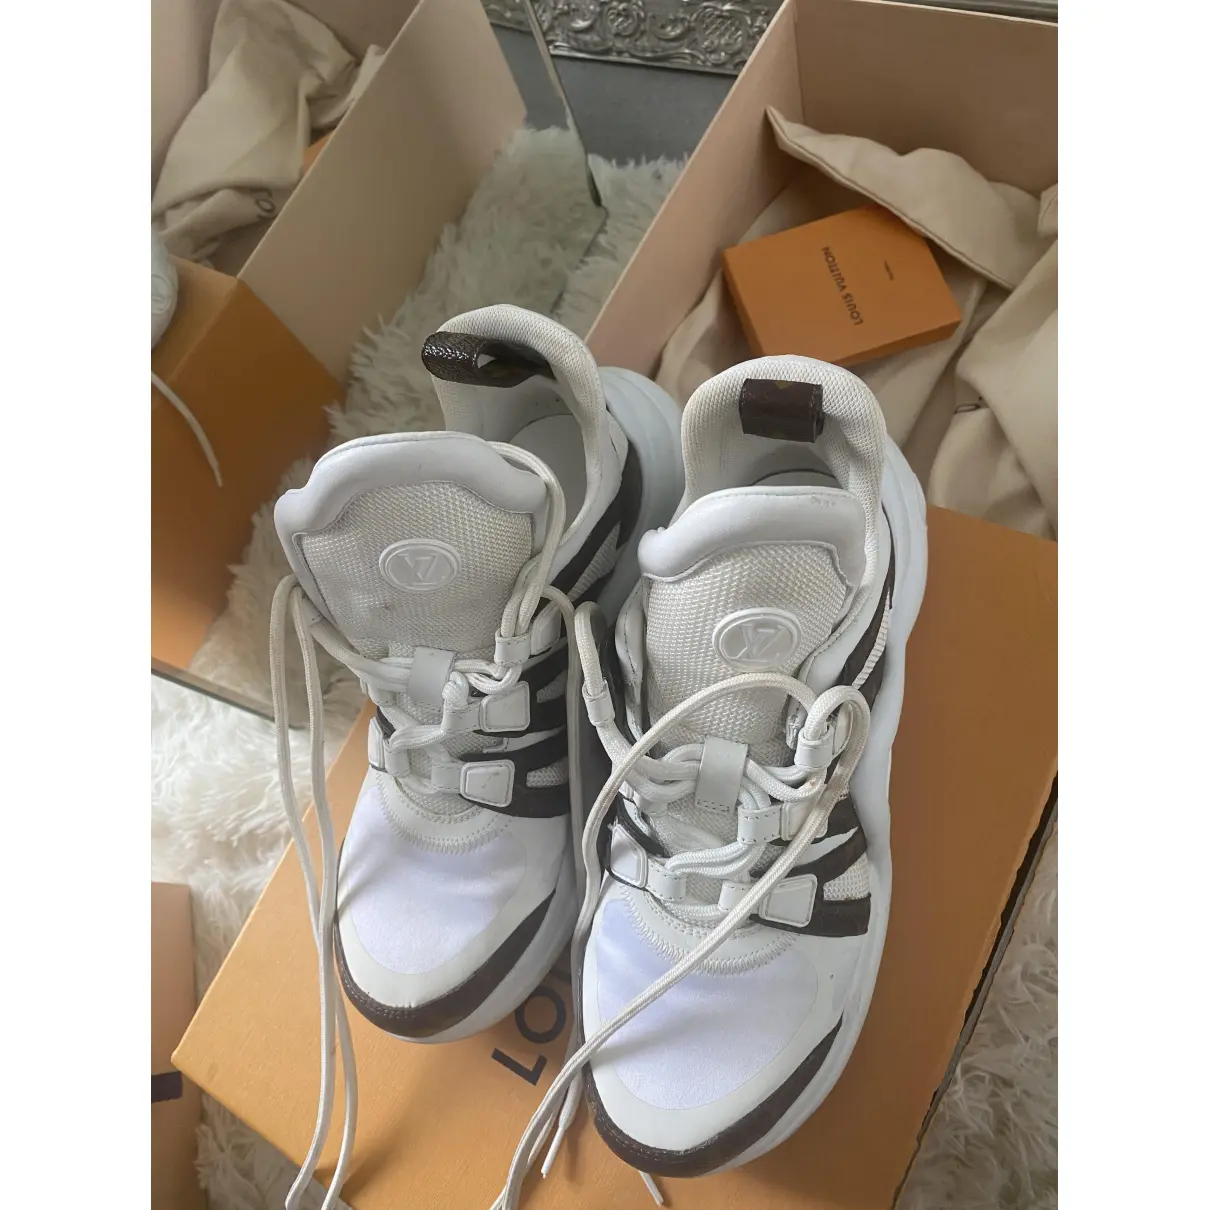 Buy Louis Vuitton Archlight leather trainers online